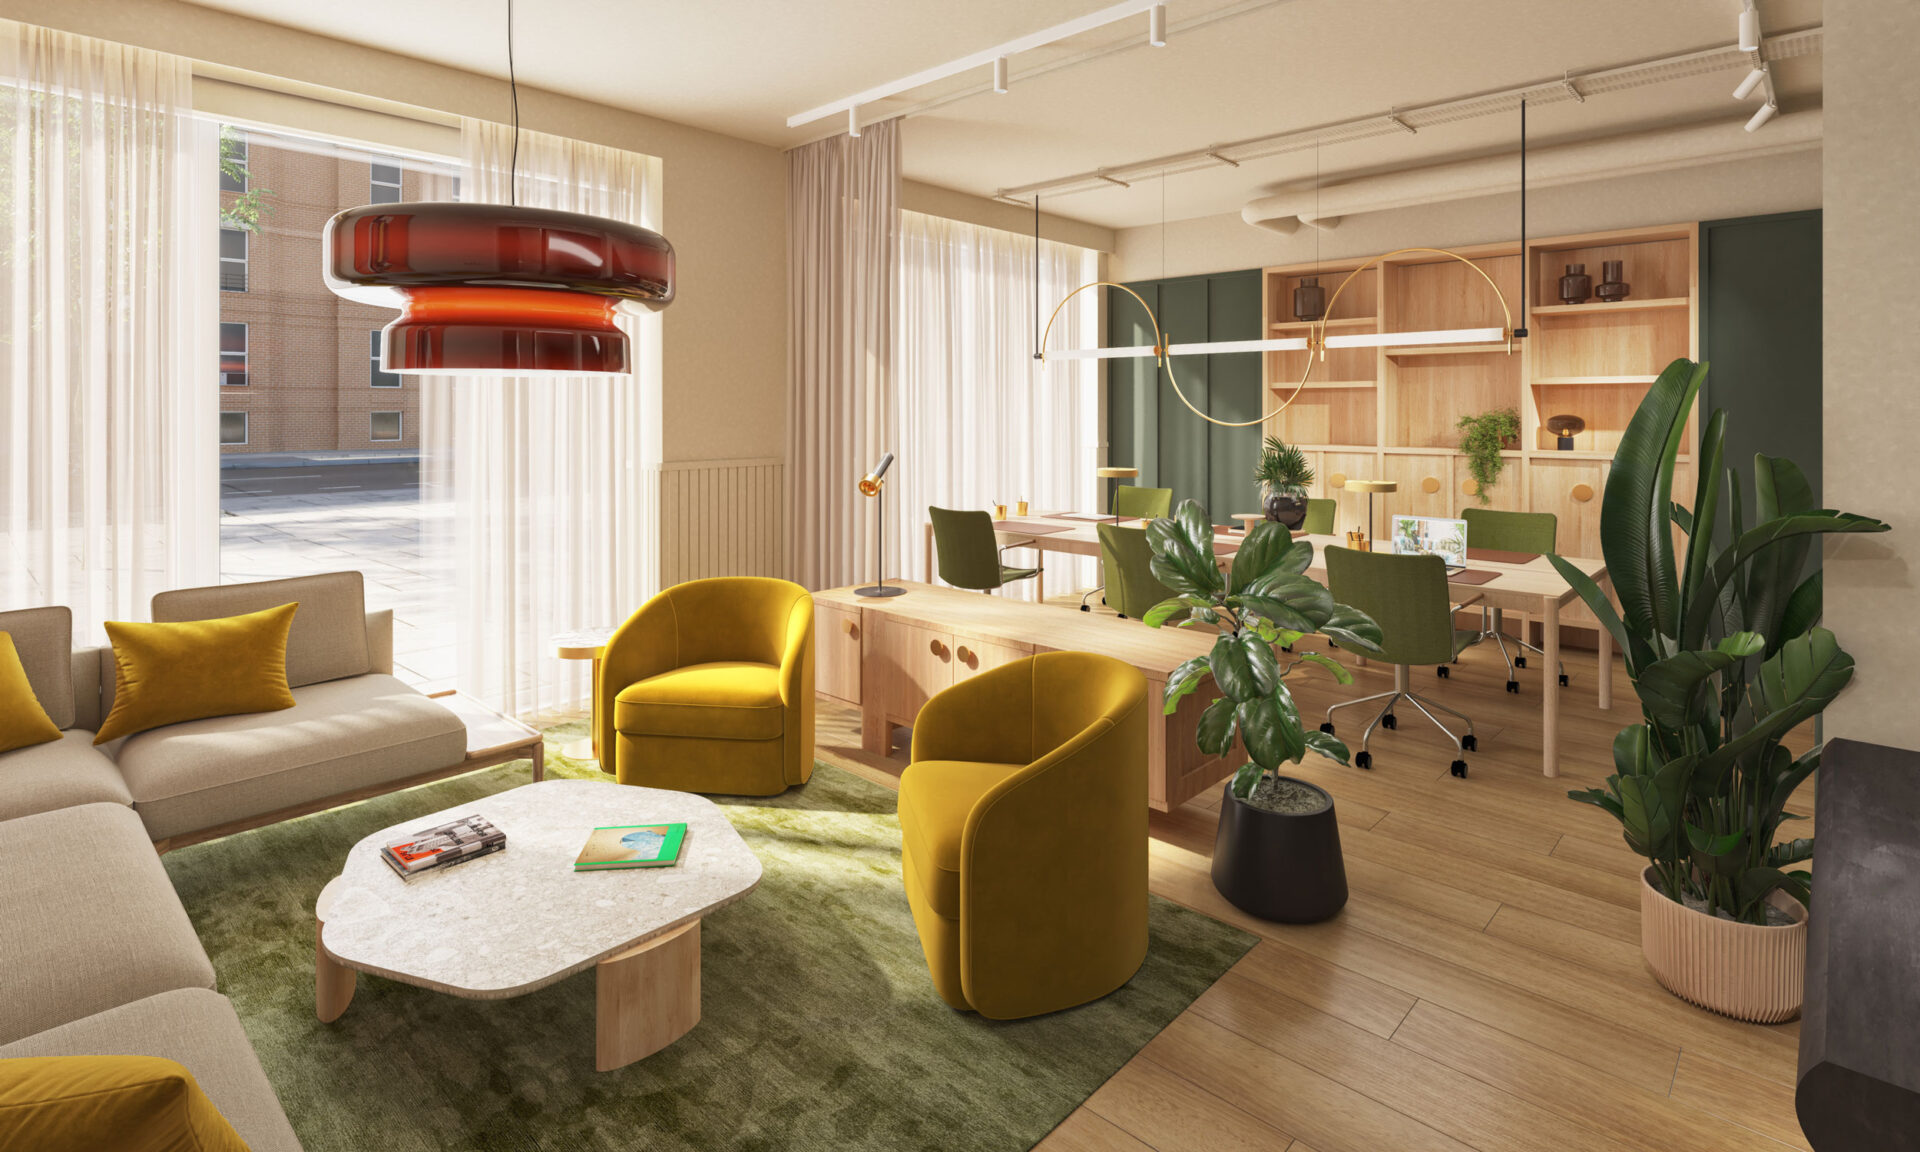 3D Model of interior design for Maltings Place office spaces in London, featuring modern furniture and plants